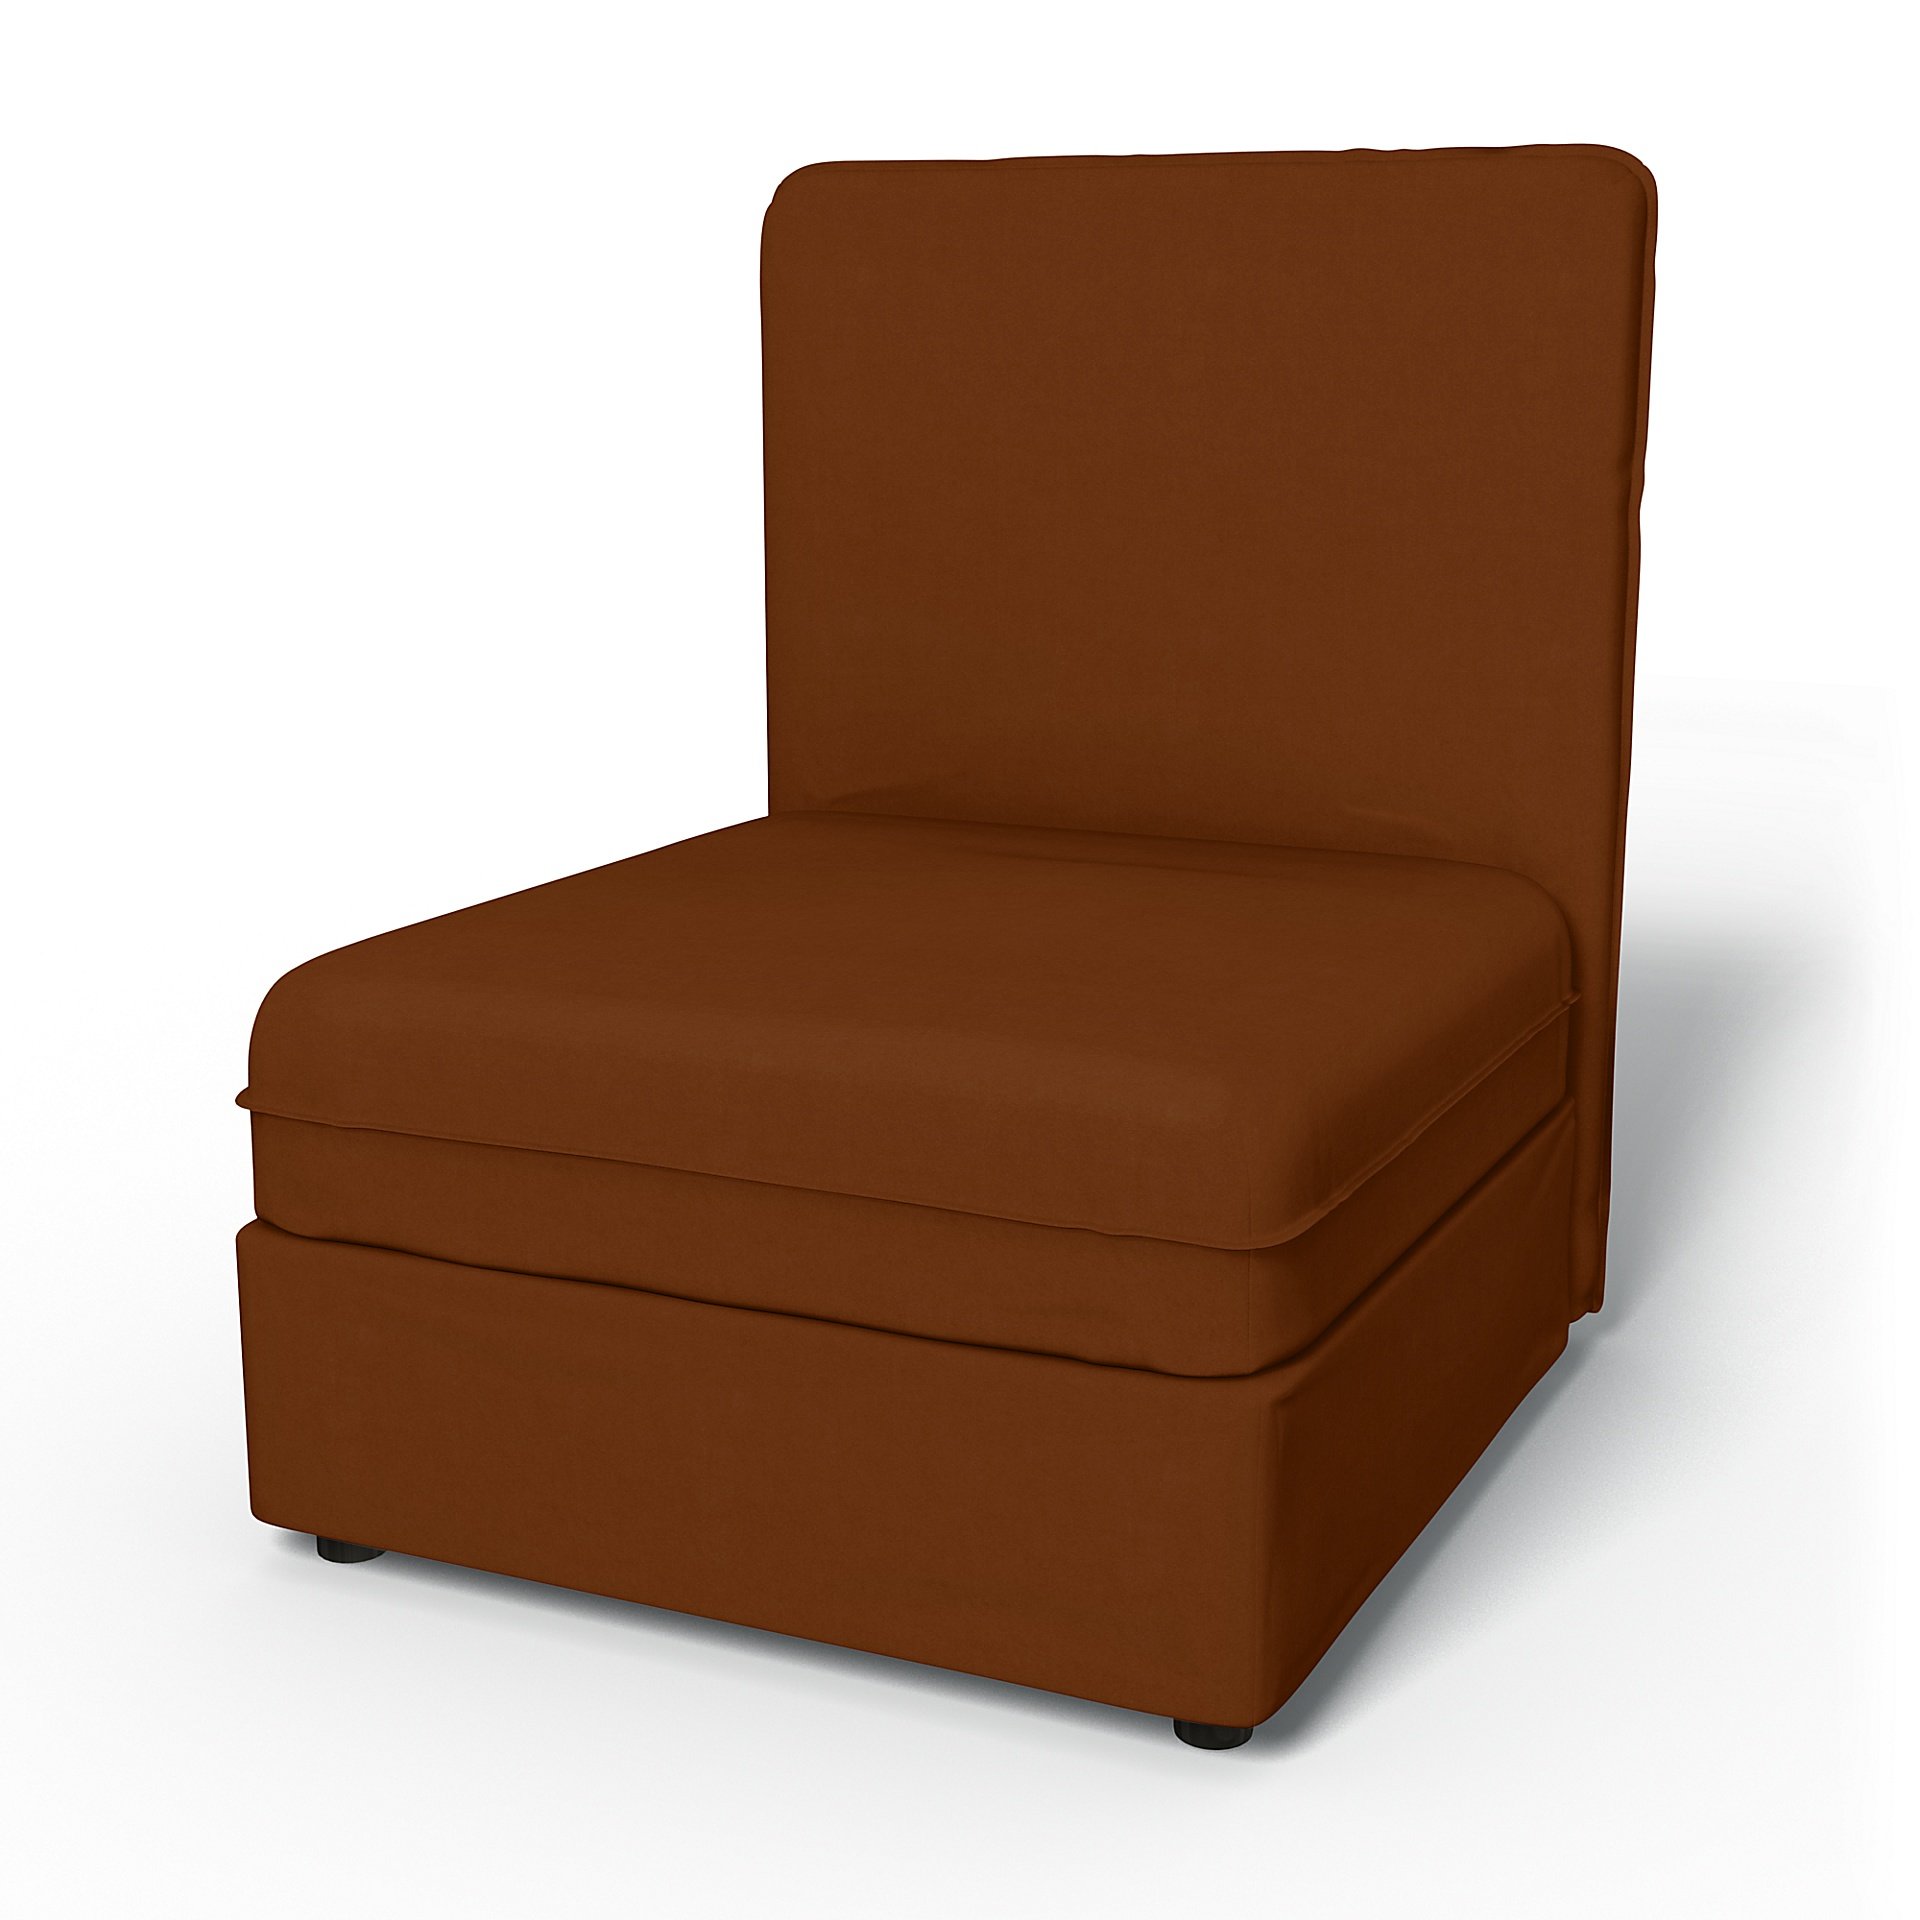 IKEA - Vallentuna Seat Module with High Back and Storage Cover 80x100cm 32x39in, Cinnamon, Velvet - 